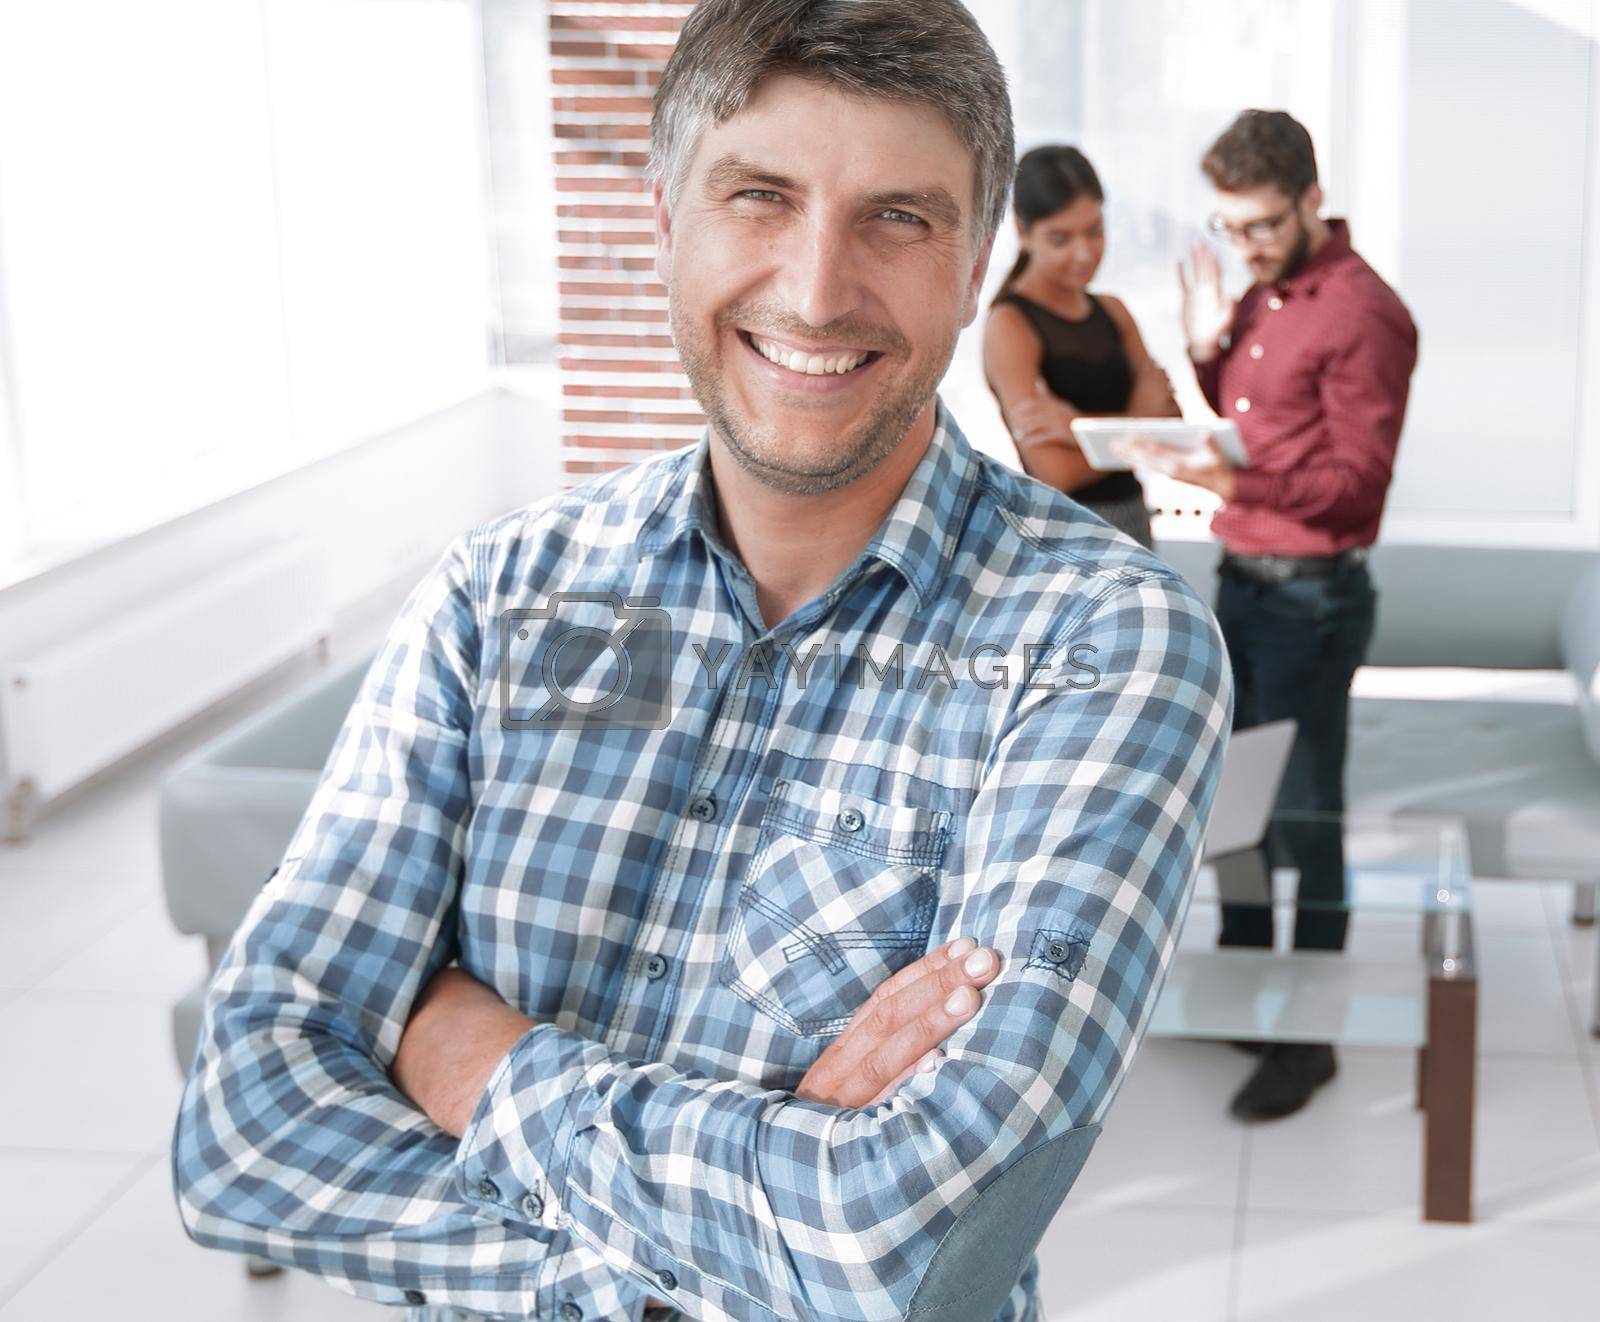 Royalty free image of Smiling mature businessman in plaid shirt foreground by asdf